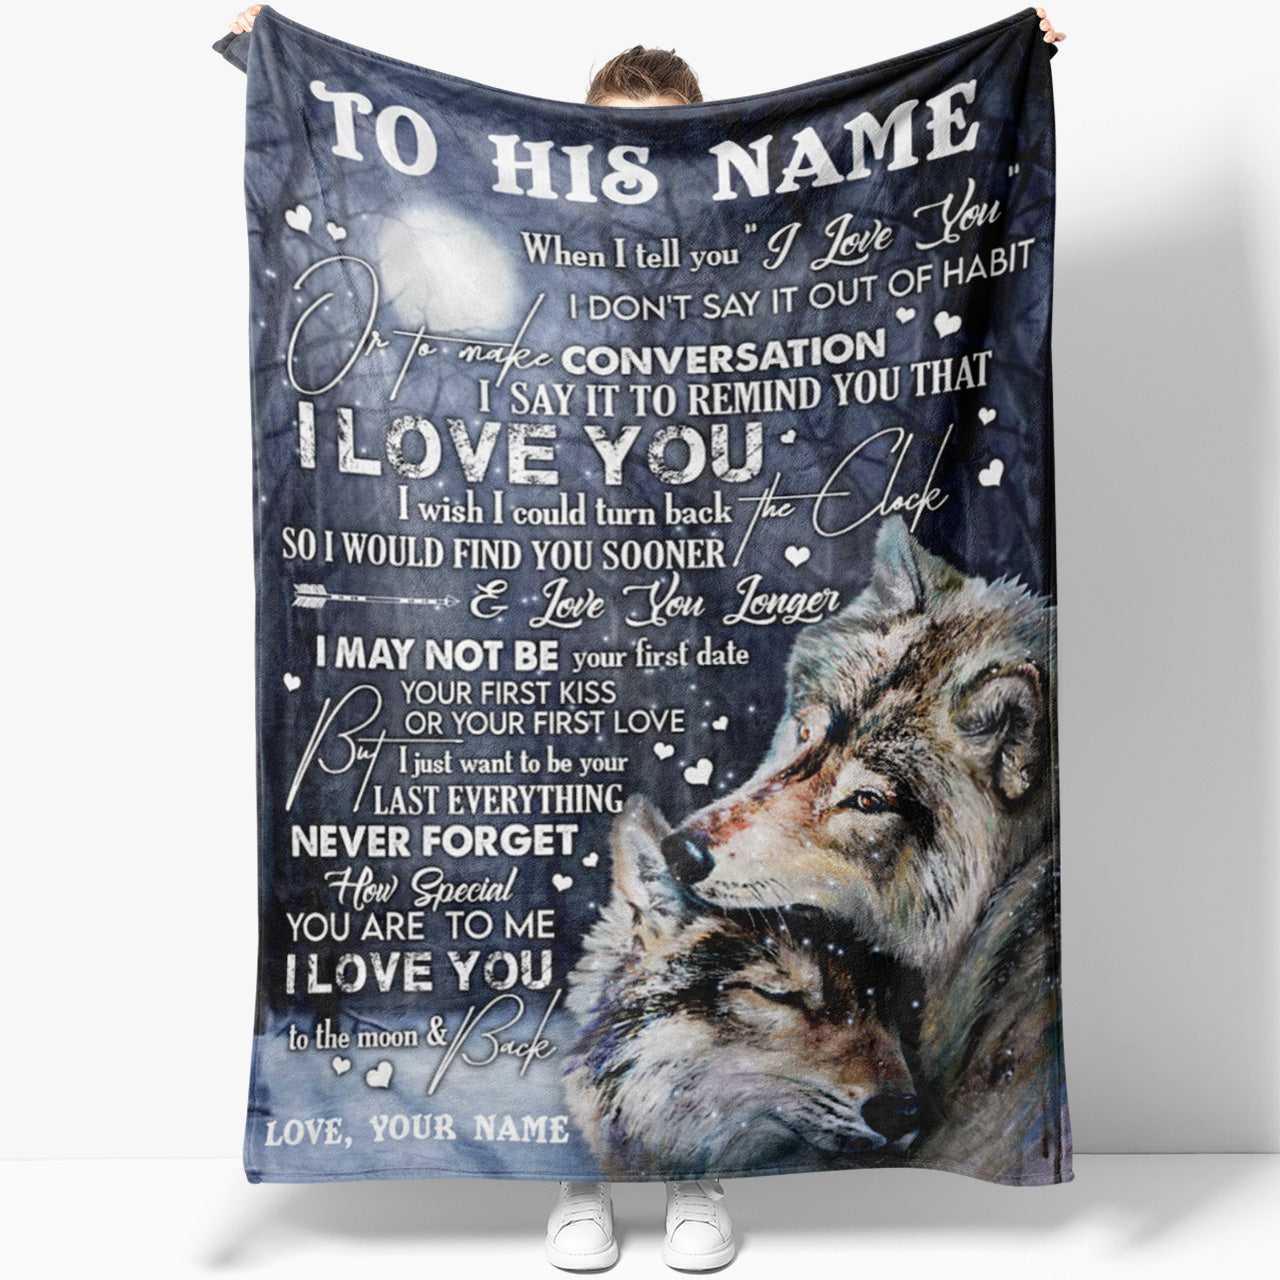 Blanket Gift For Him, Anniversary Gifts For Him, It Out of Habit